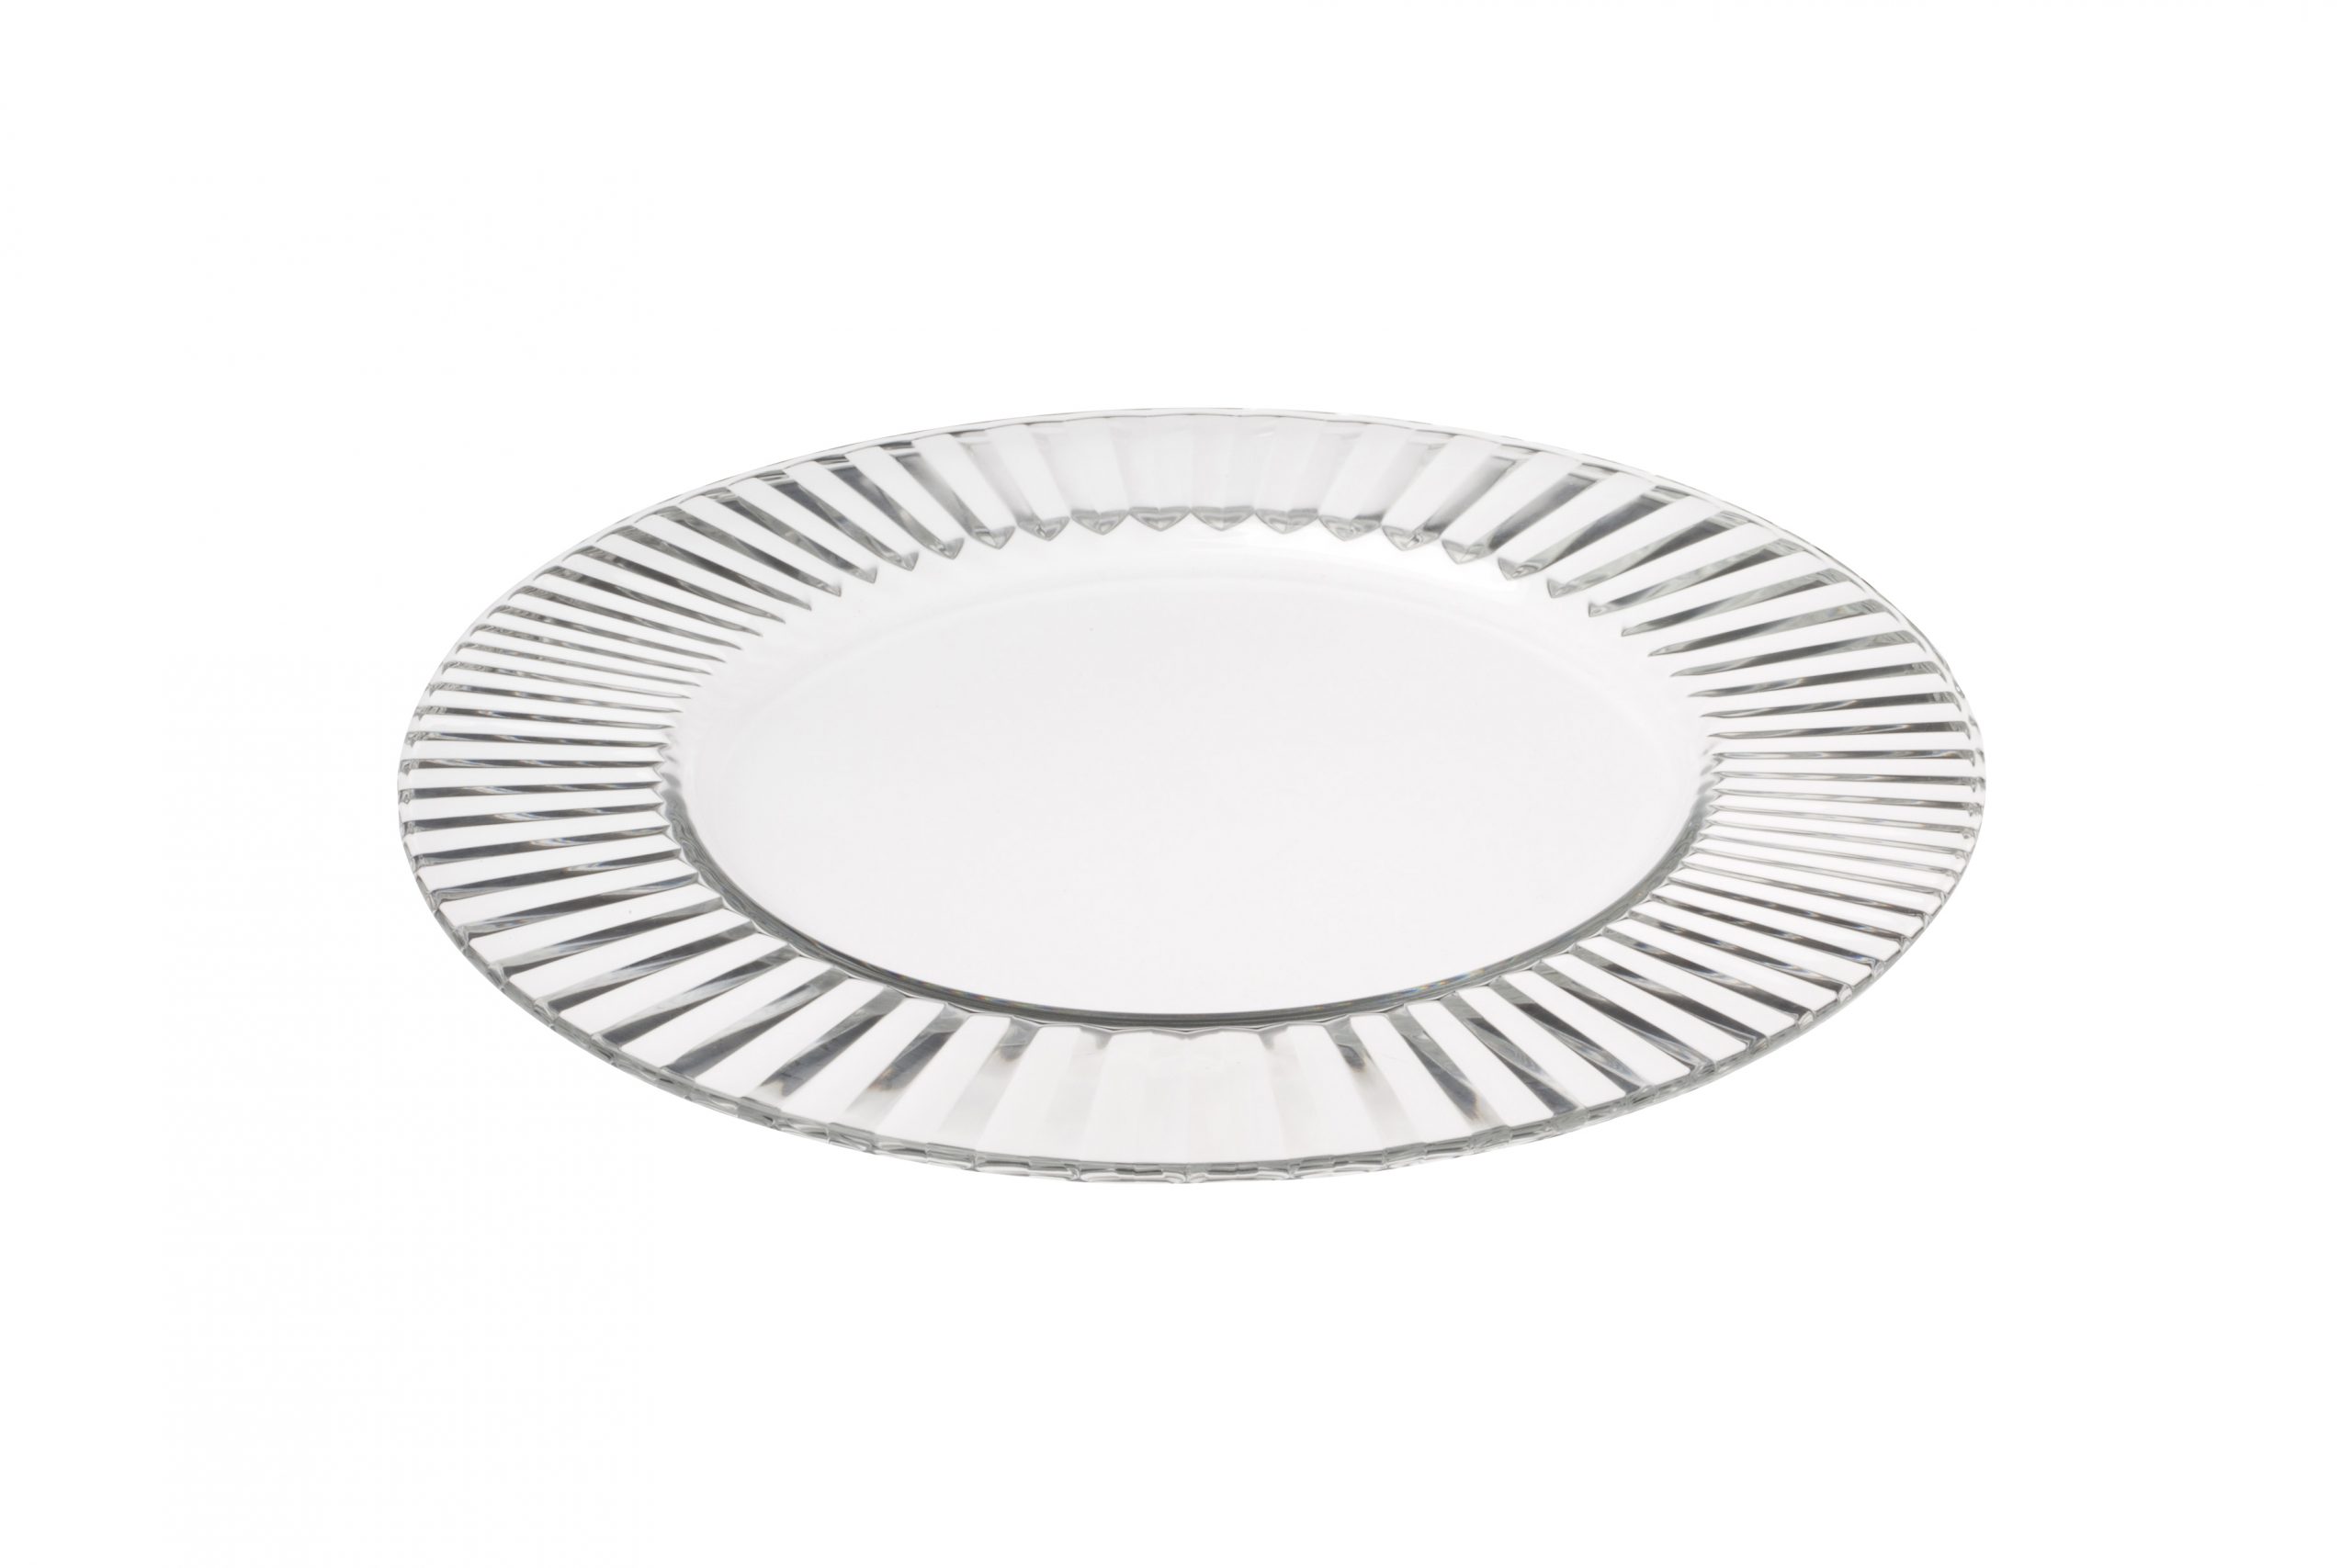 Charger Plates - Place Settings Event Hire London & UK